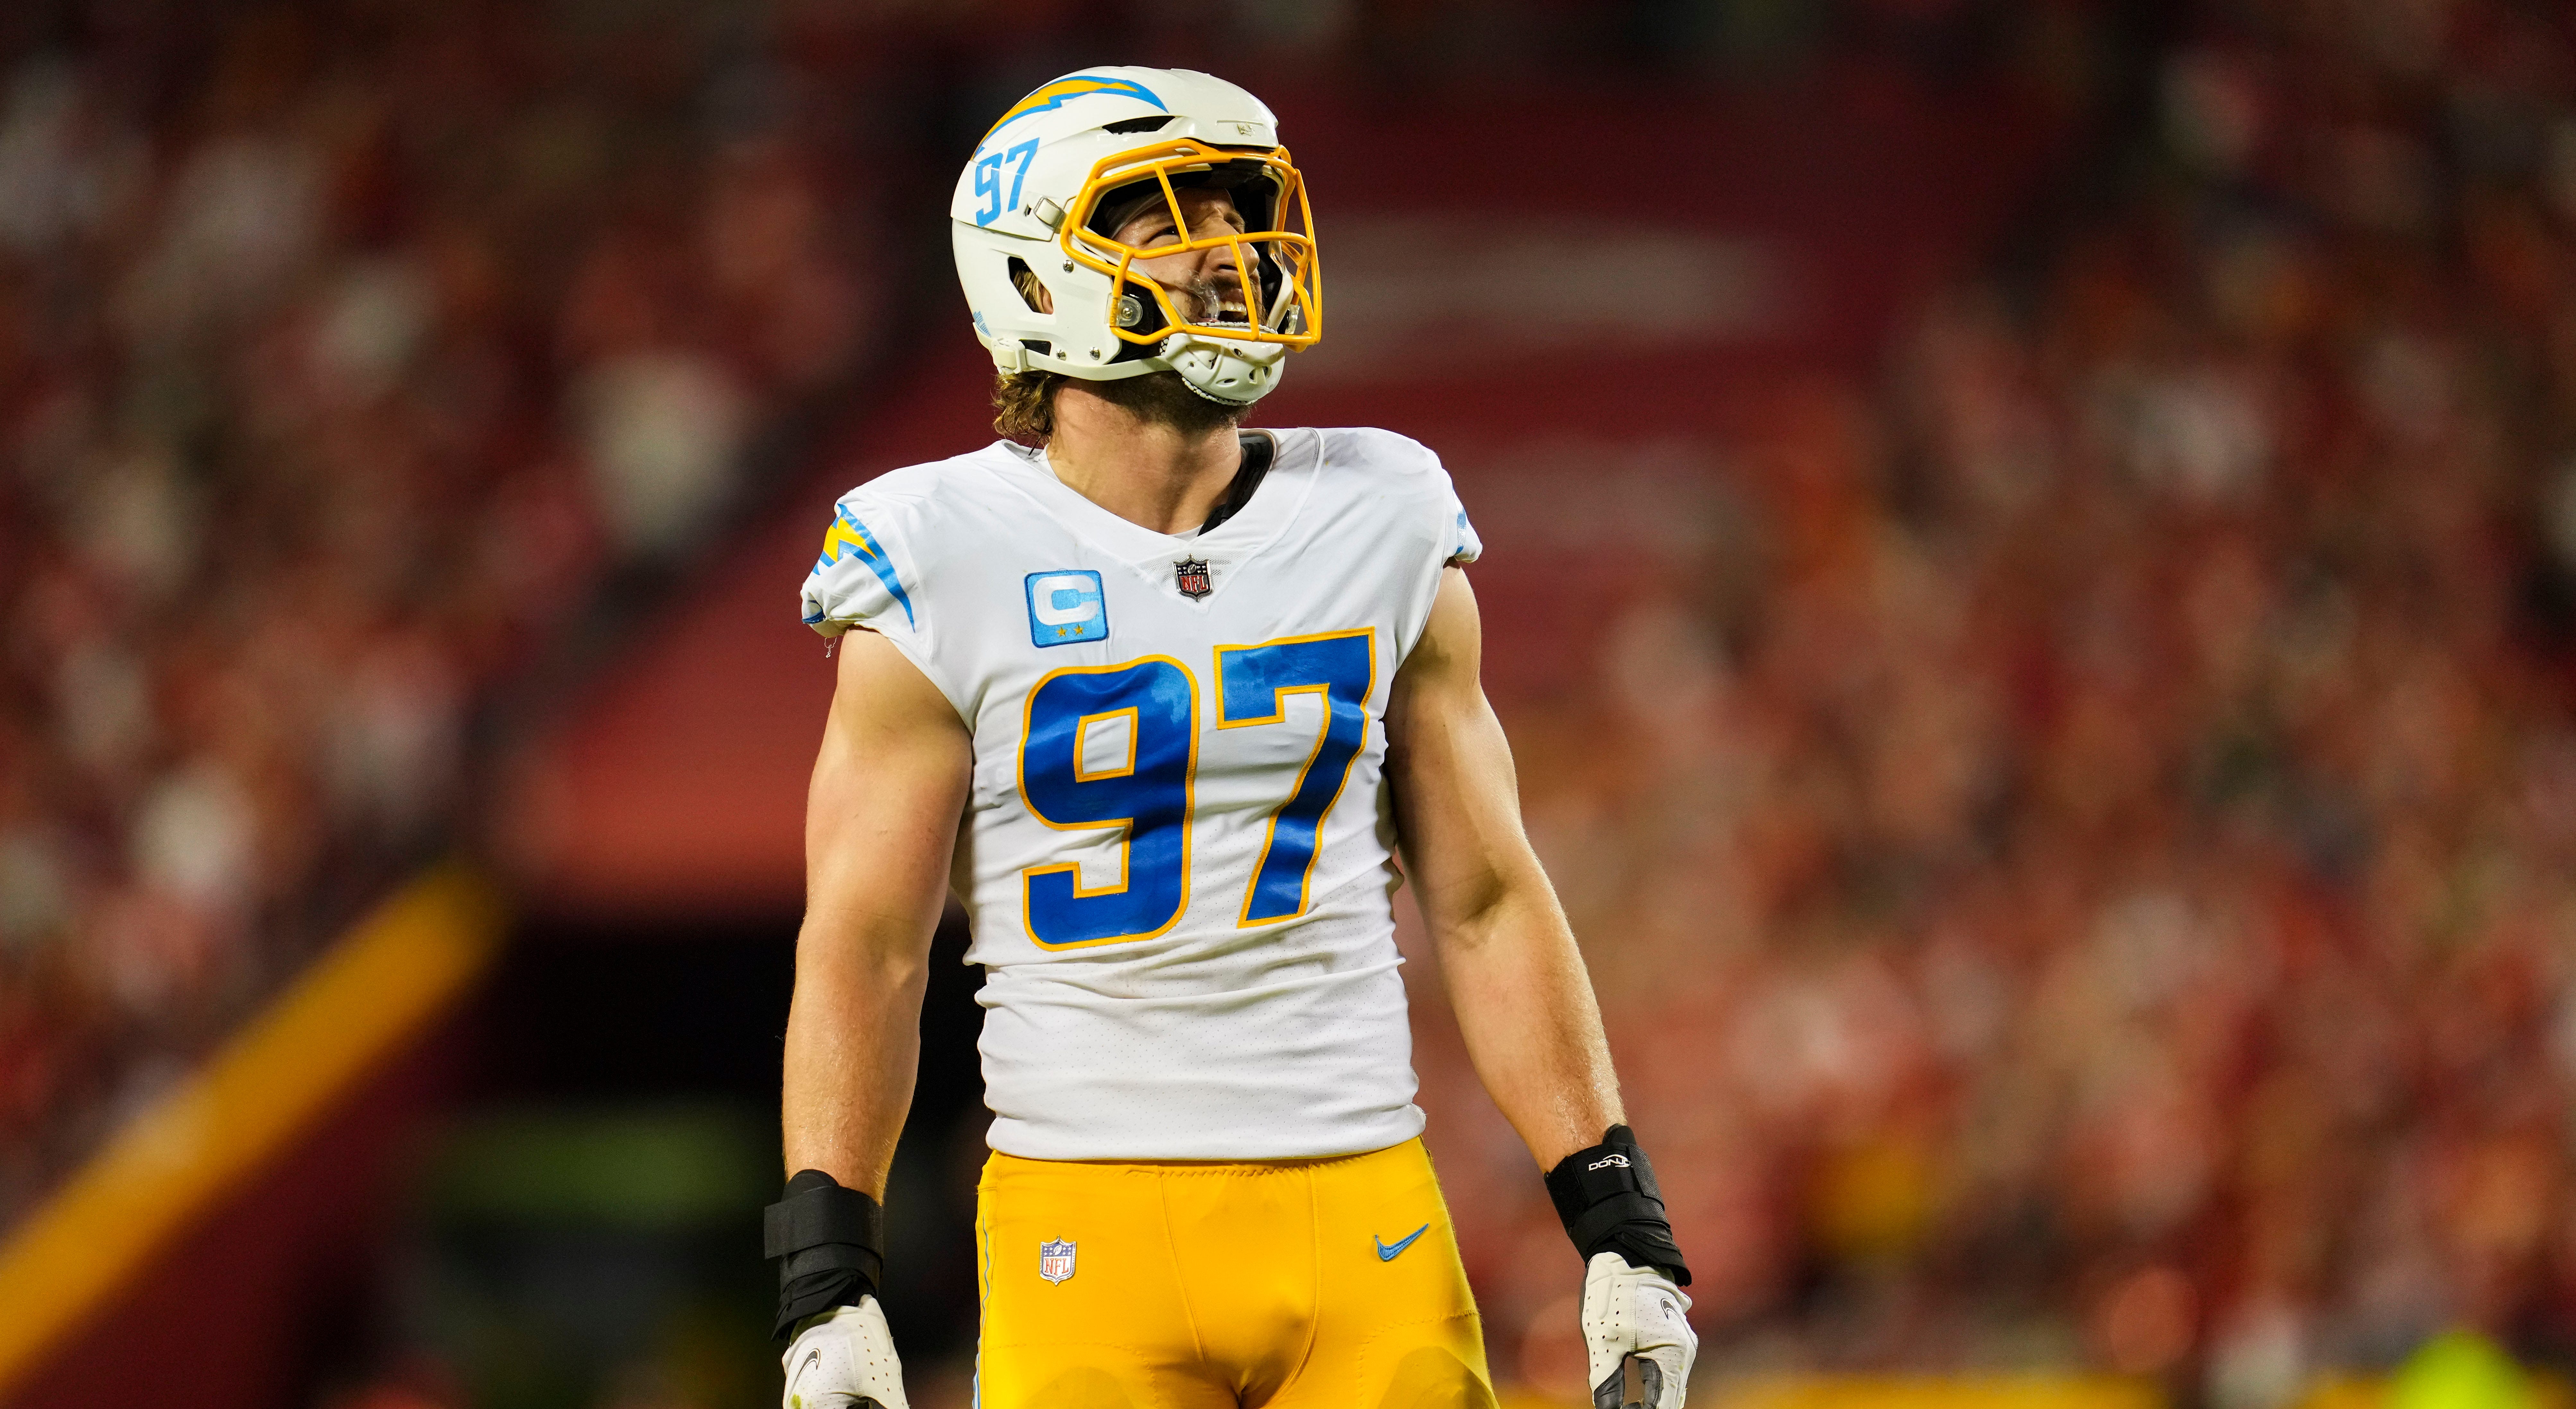 Joey Bosa's NFL career is going pretty well already